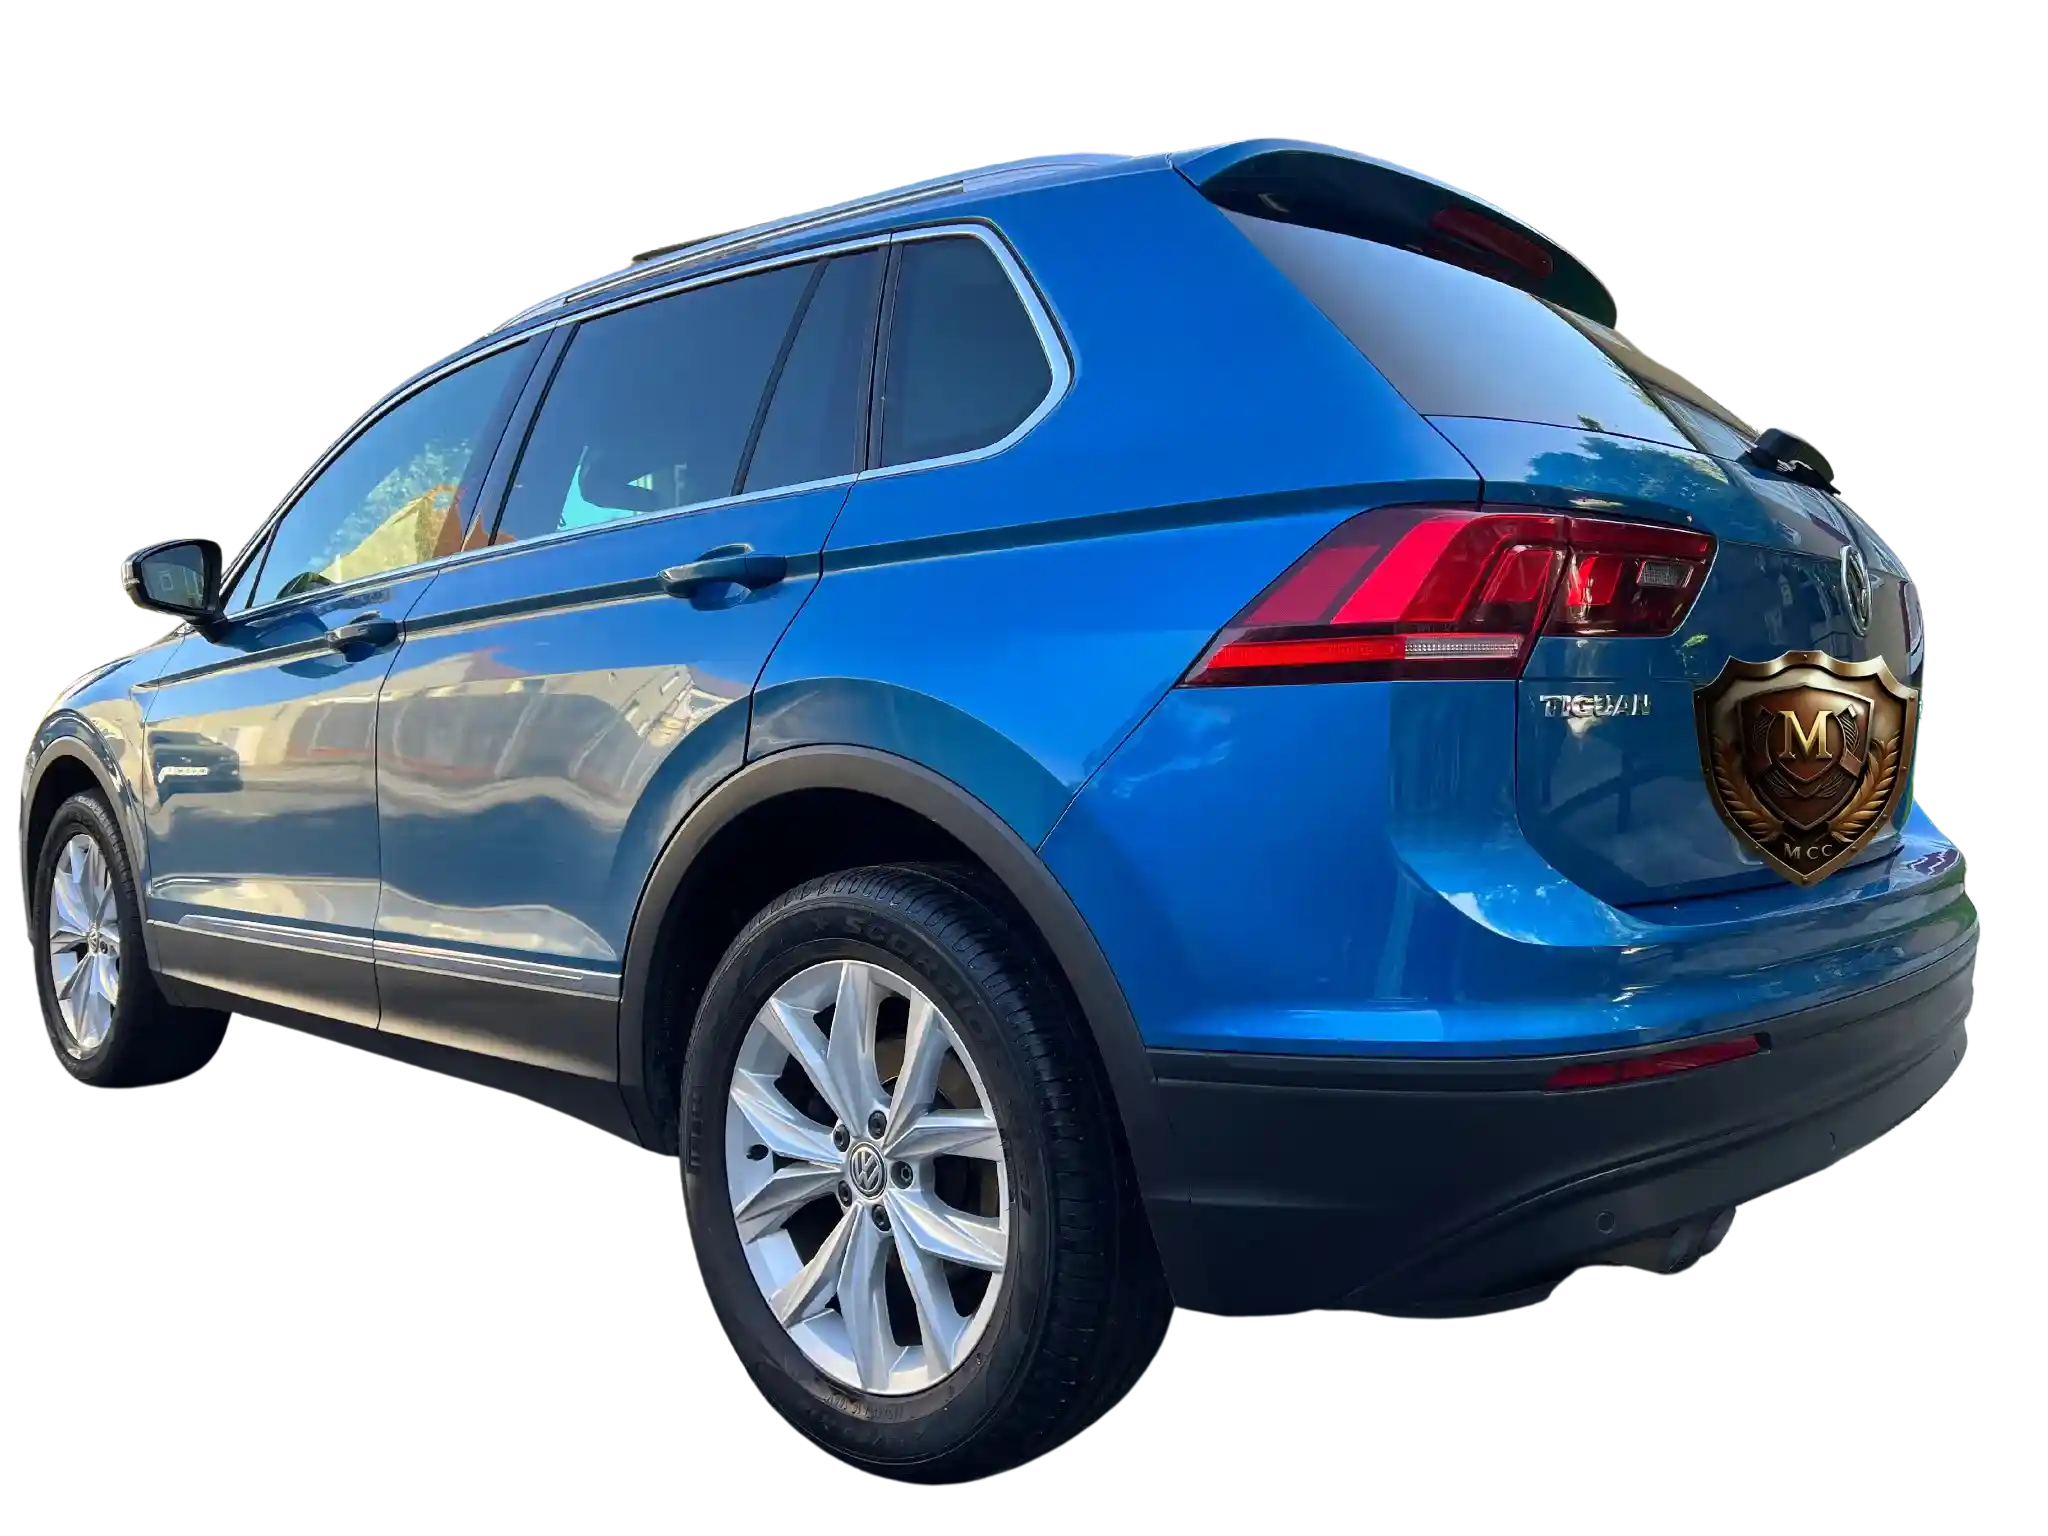 Eco-friendly waterless valeting of a Volkswagen Tiguan 4Motion in Richmond, enhancing its rugged elegance and reflecting corporate environmental values.